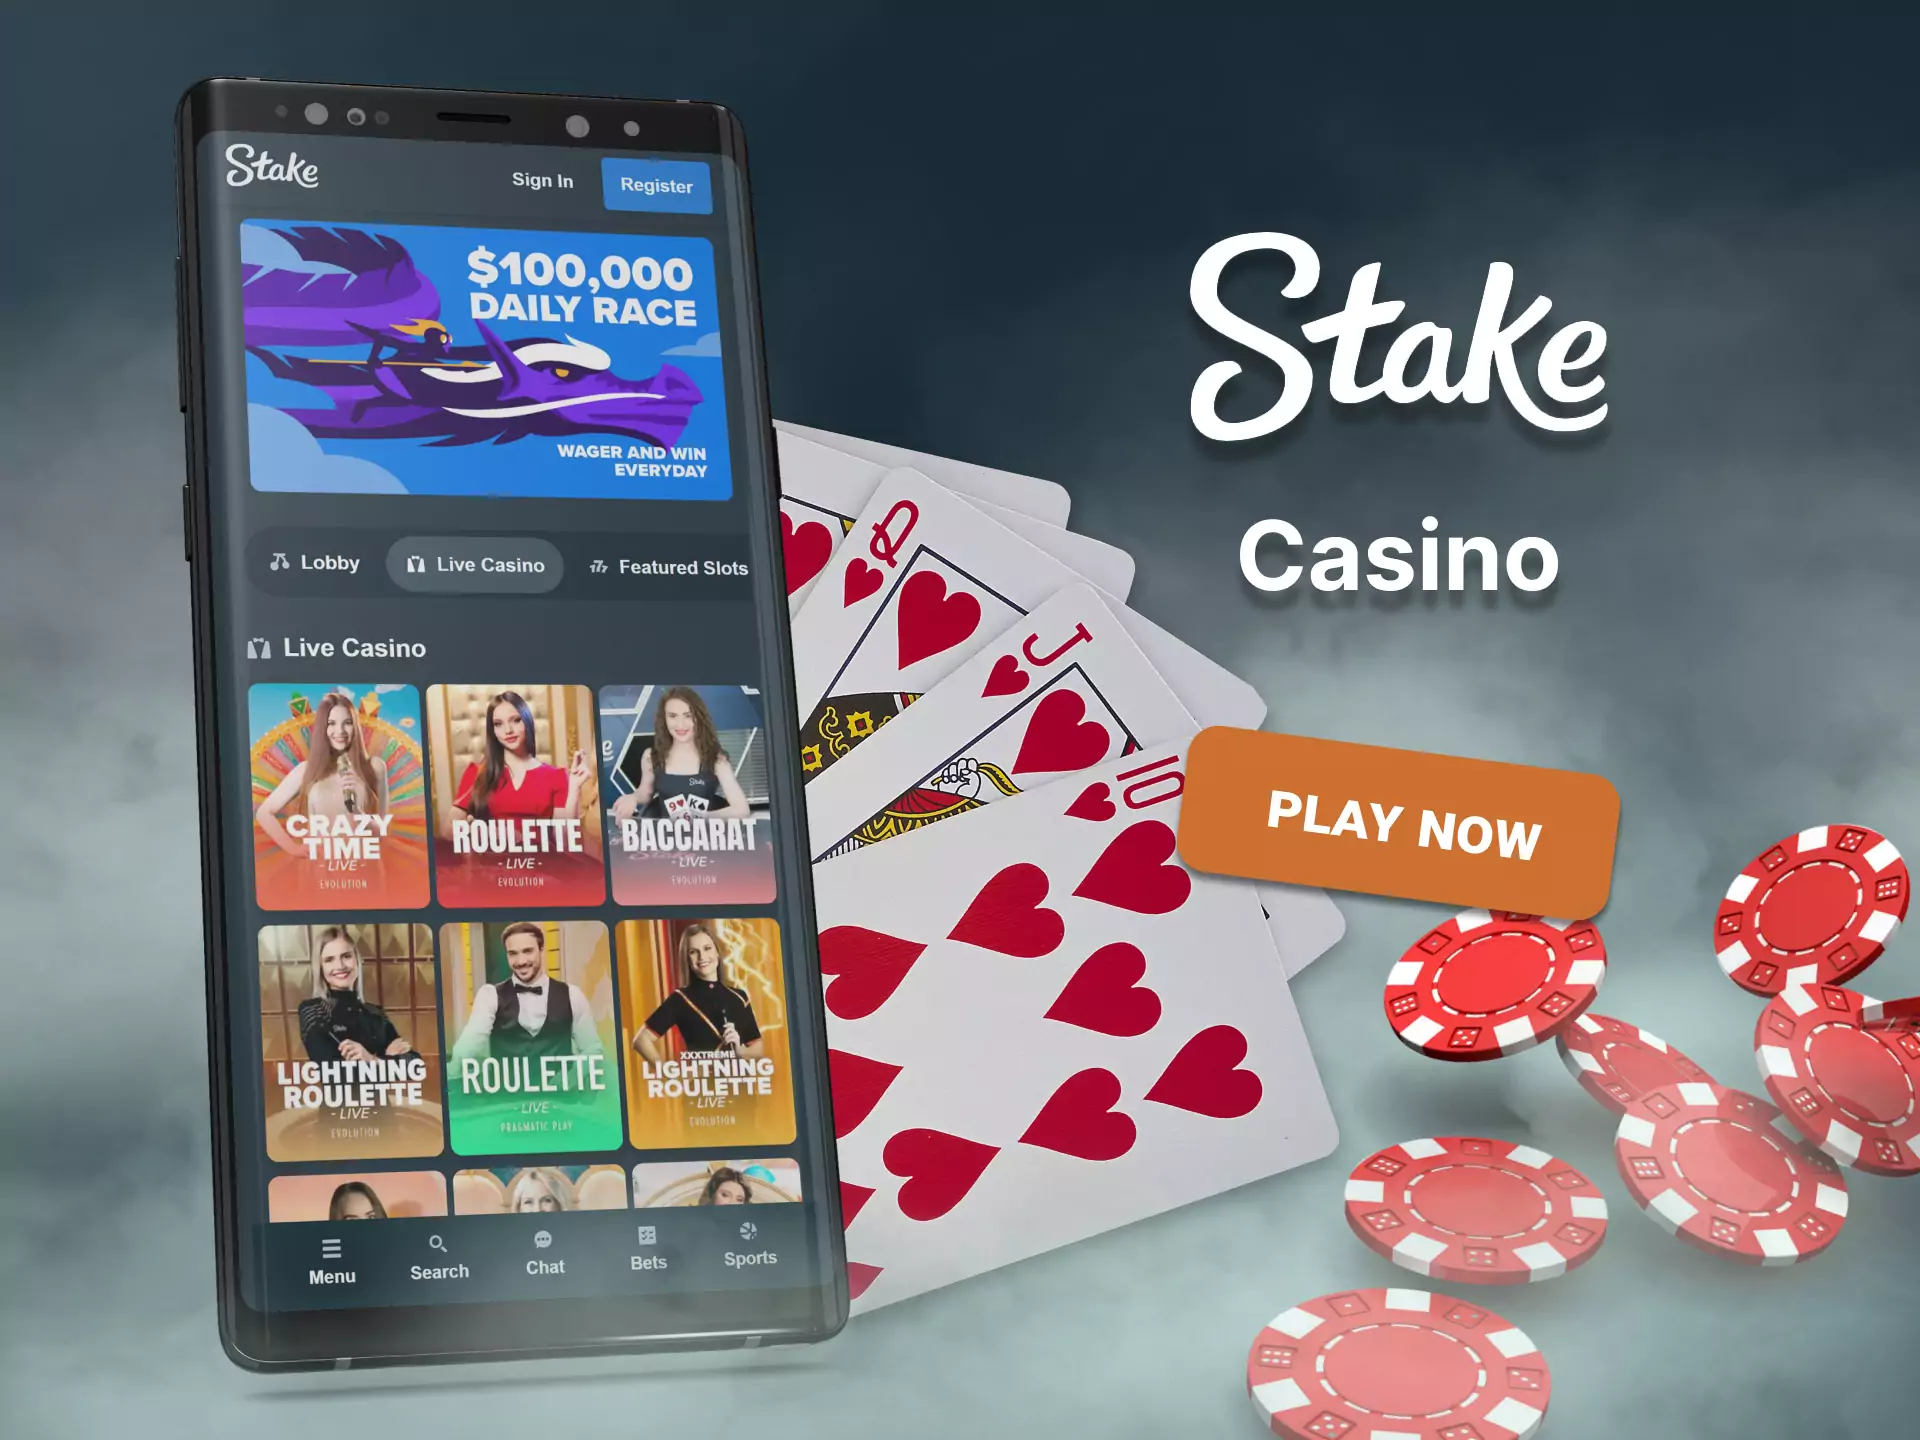 Play at the casino Stake.com and win.